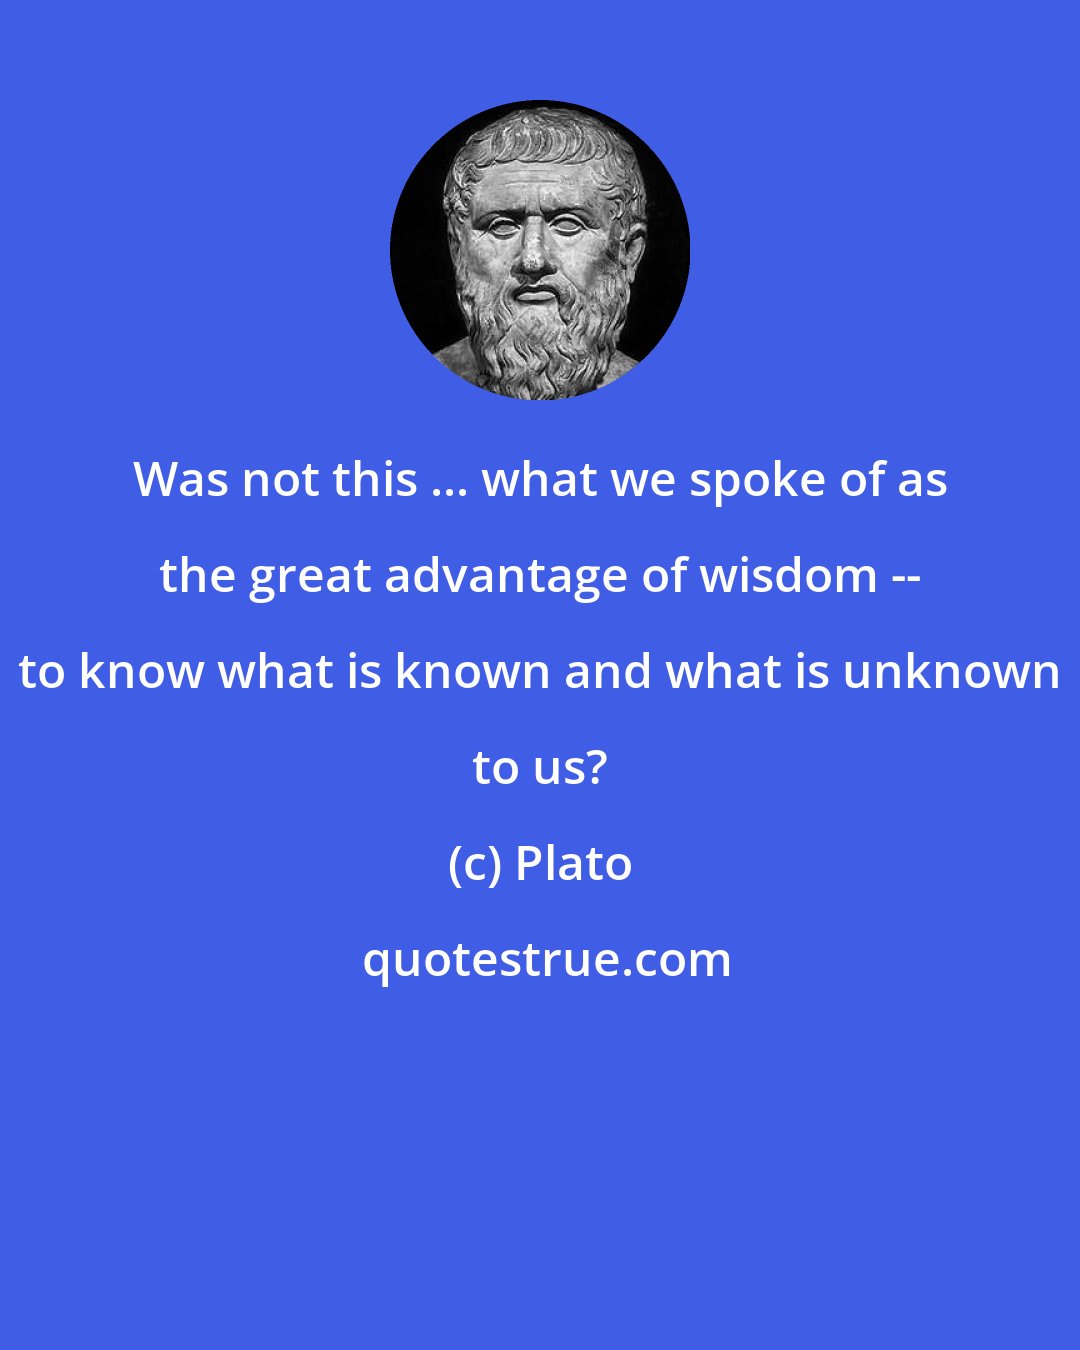 Plato: Was not this ... what we spoke of as the great advantage of wisdom -- to know what is known and what is unknown to us?